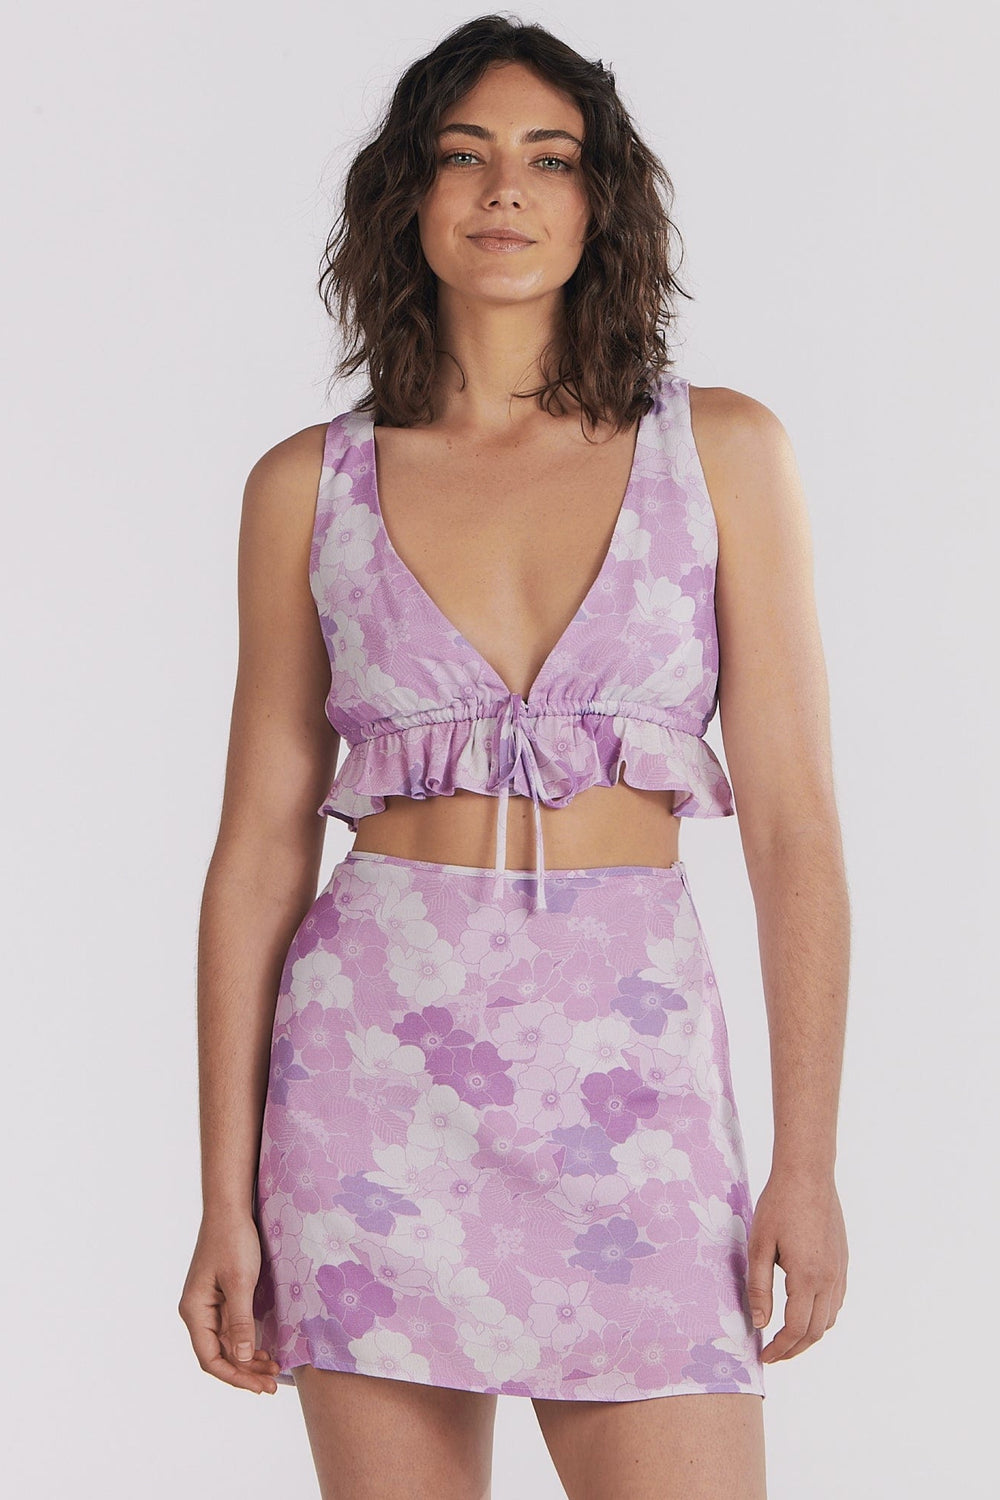 Lilac Floral Phoebe Skirt